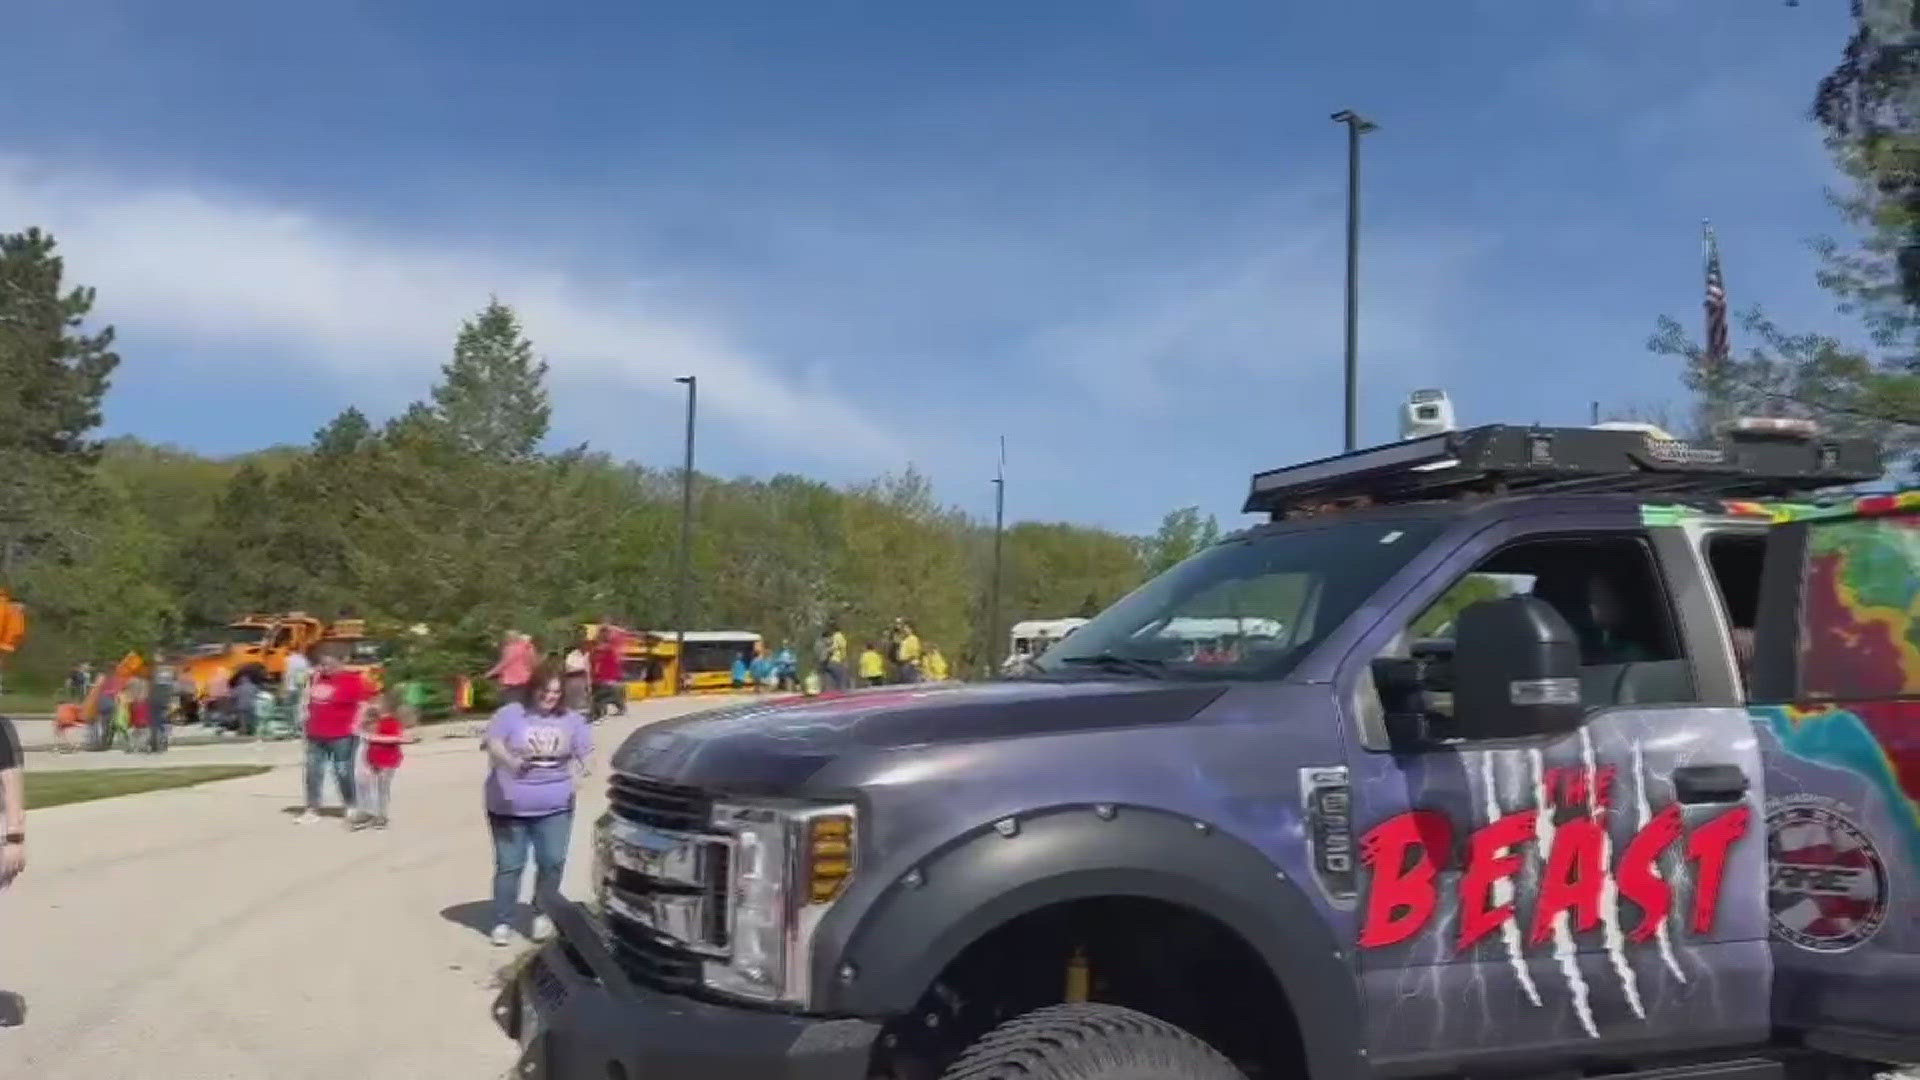 25 organizations were around the show off their trucks and what they do for the community.